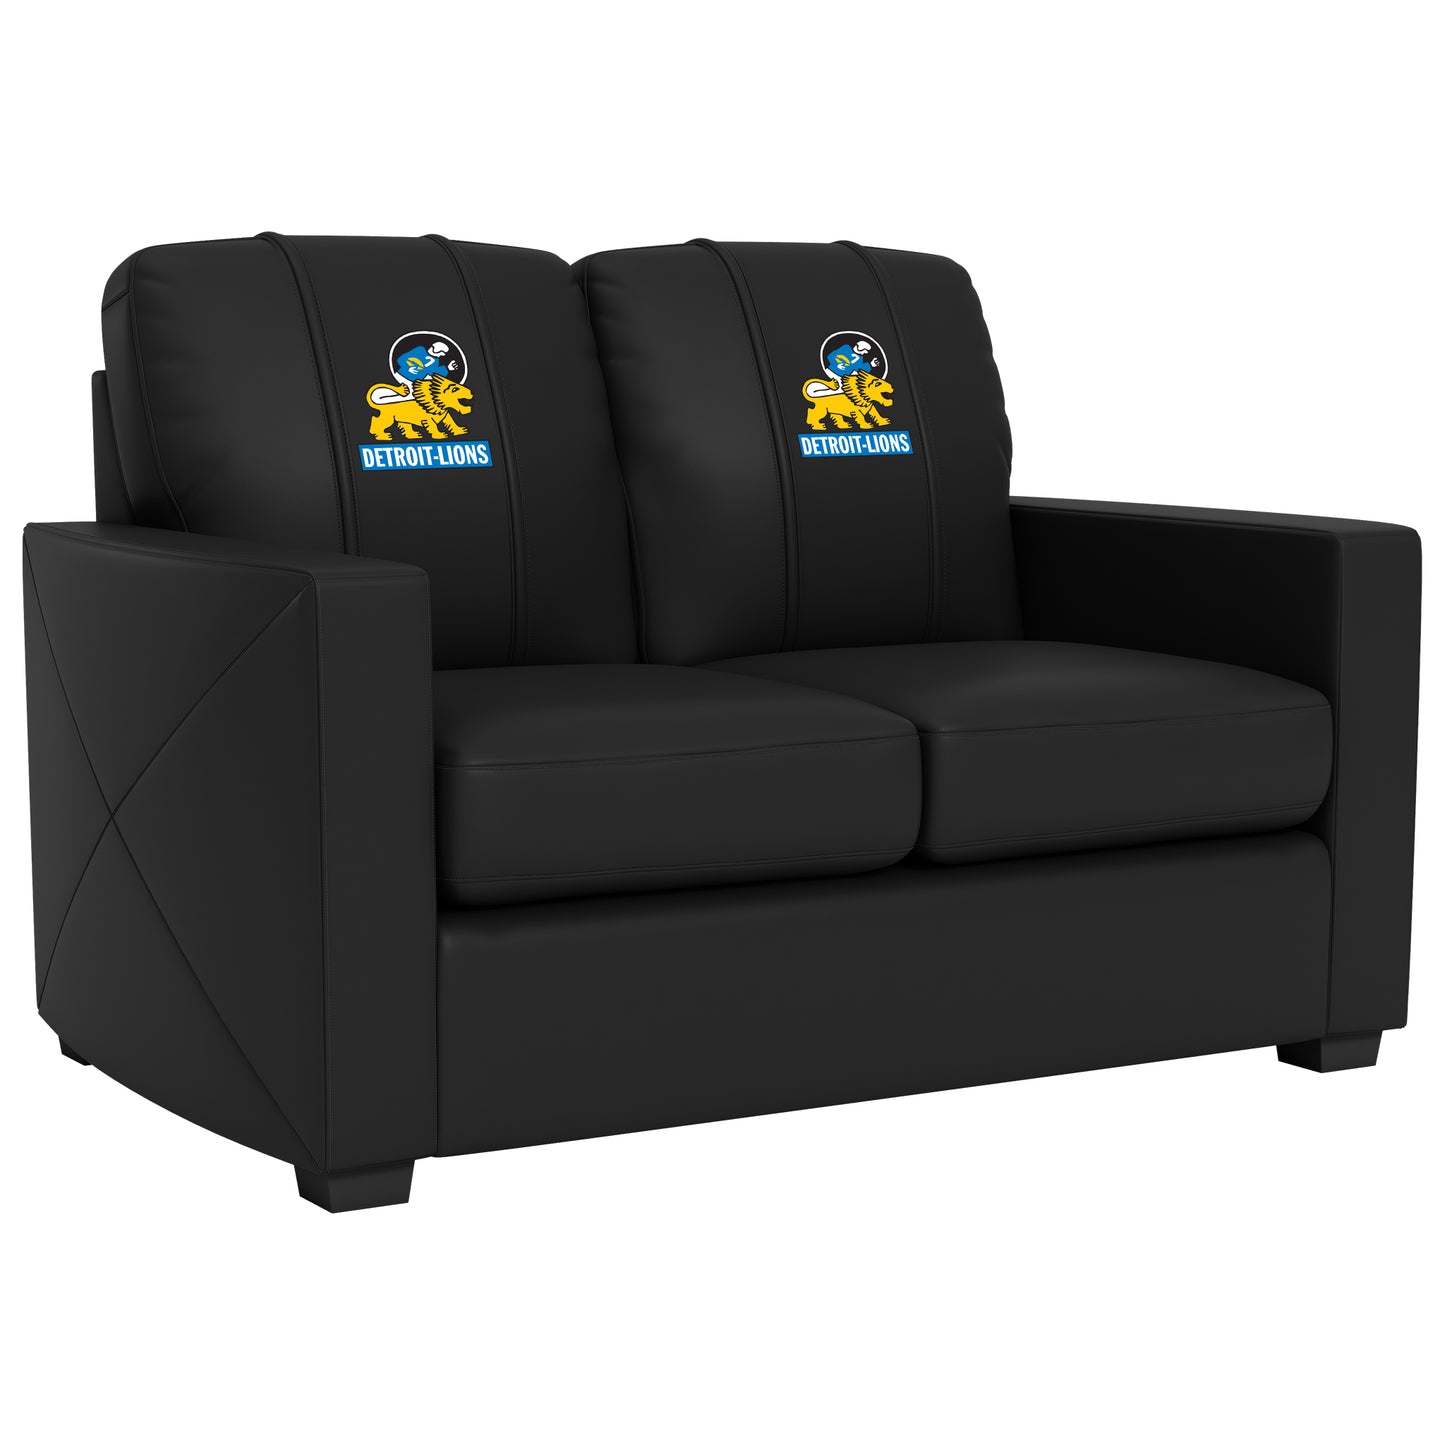 Silver Loveseat with Detroit Lions Classic Logo